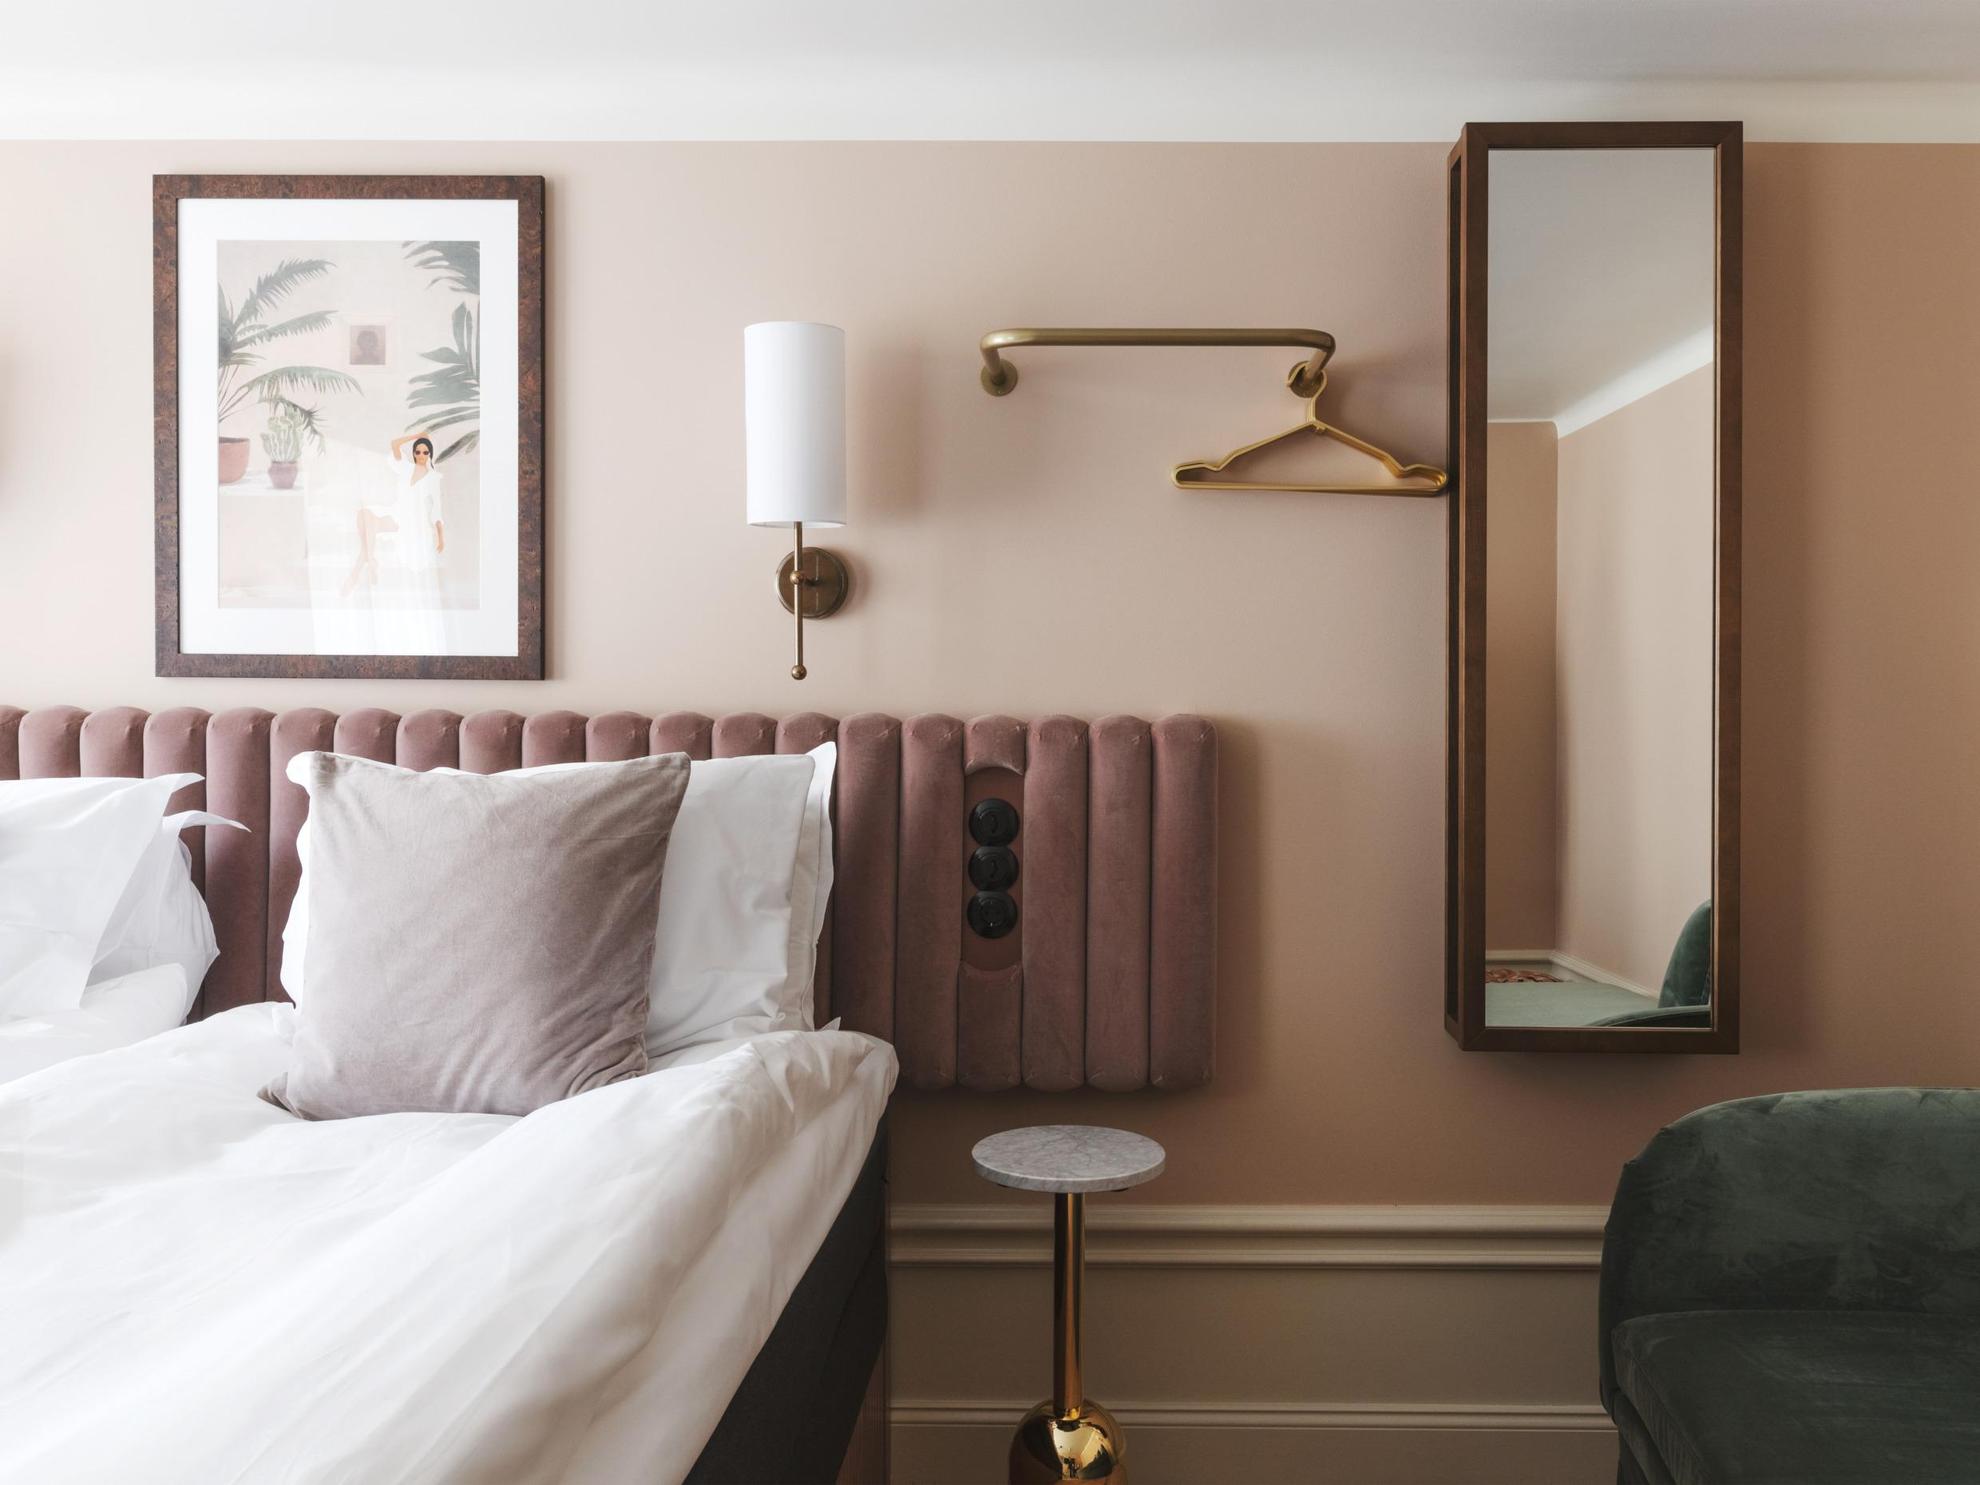 A hotel room with beige-painted walls and a white ceiling. A brass wall lamp, a painting, a mirror and a coat hanger decorate the walls next to a double bed.